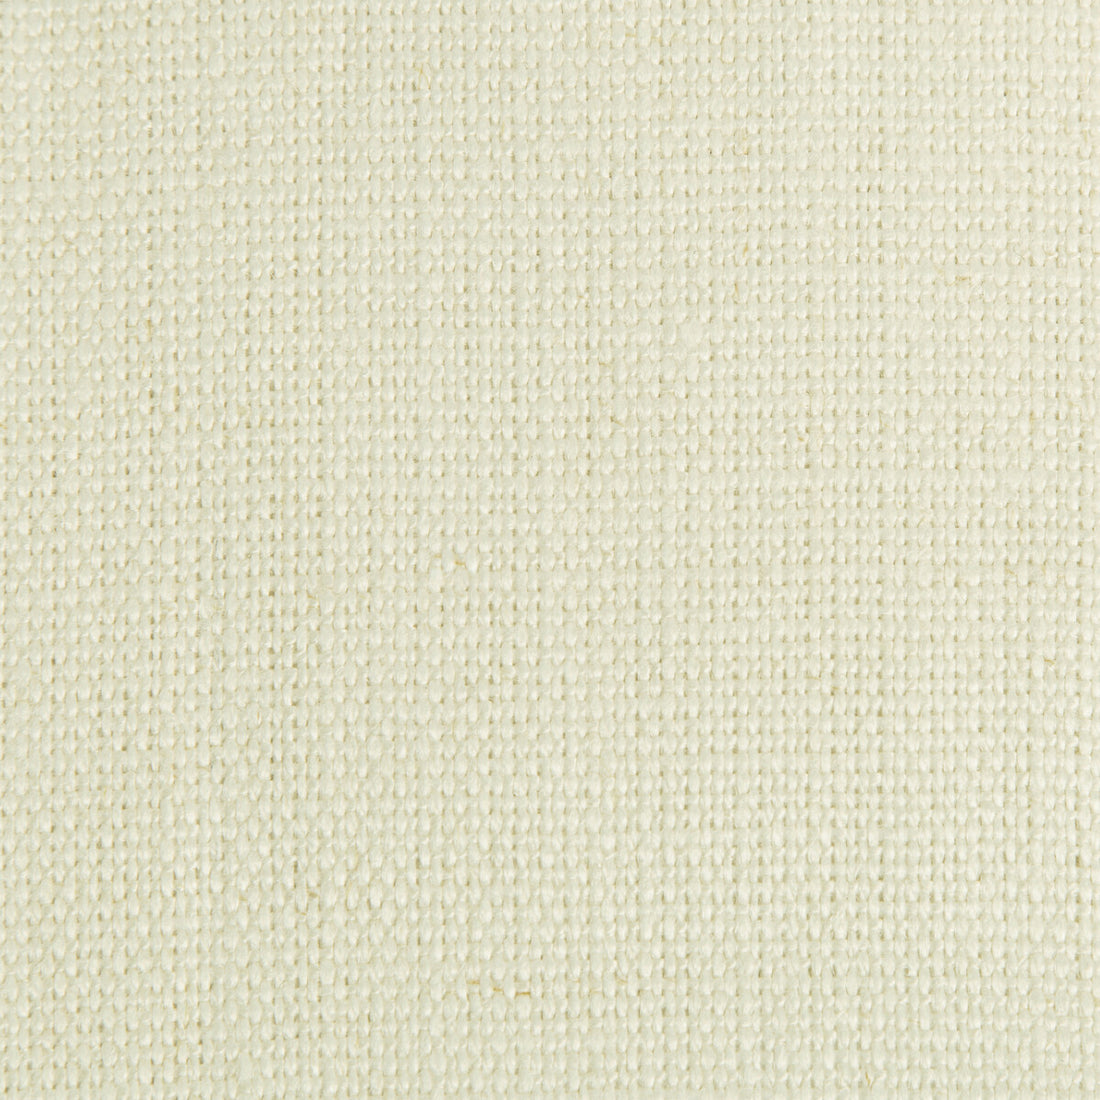 Stone Harbor fabric in cotton ball color - pattern 27591.1001.0 - by Kravet Basics in the The Complete Linen IV collection